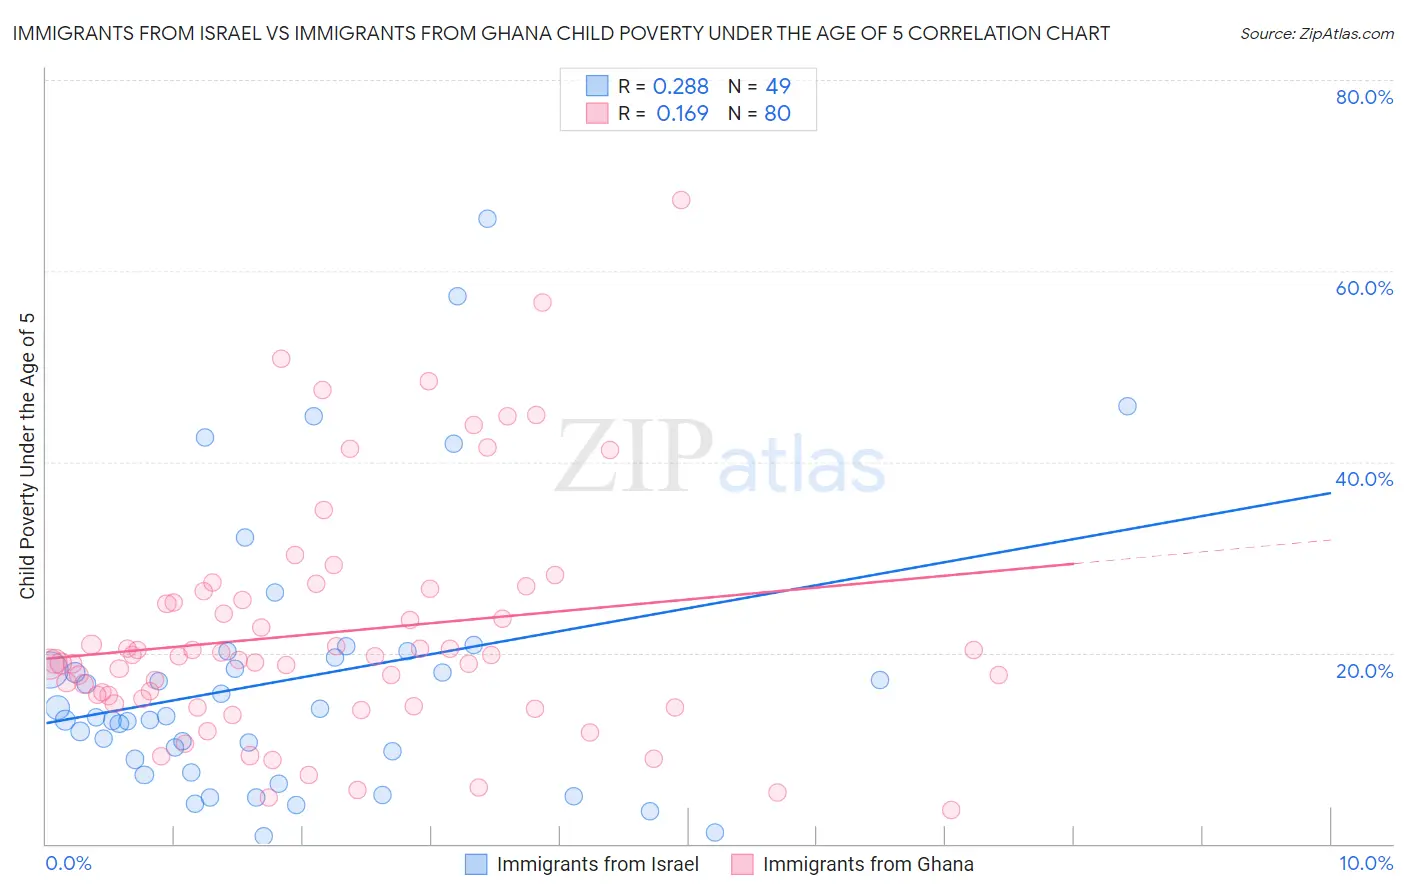 Immigrants from Israel vs Immigrants from Ghana Child Poverty Under the Age of 5